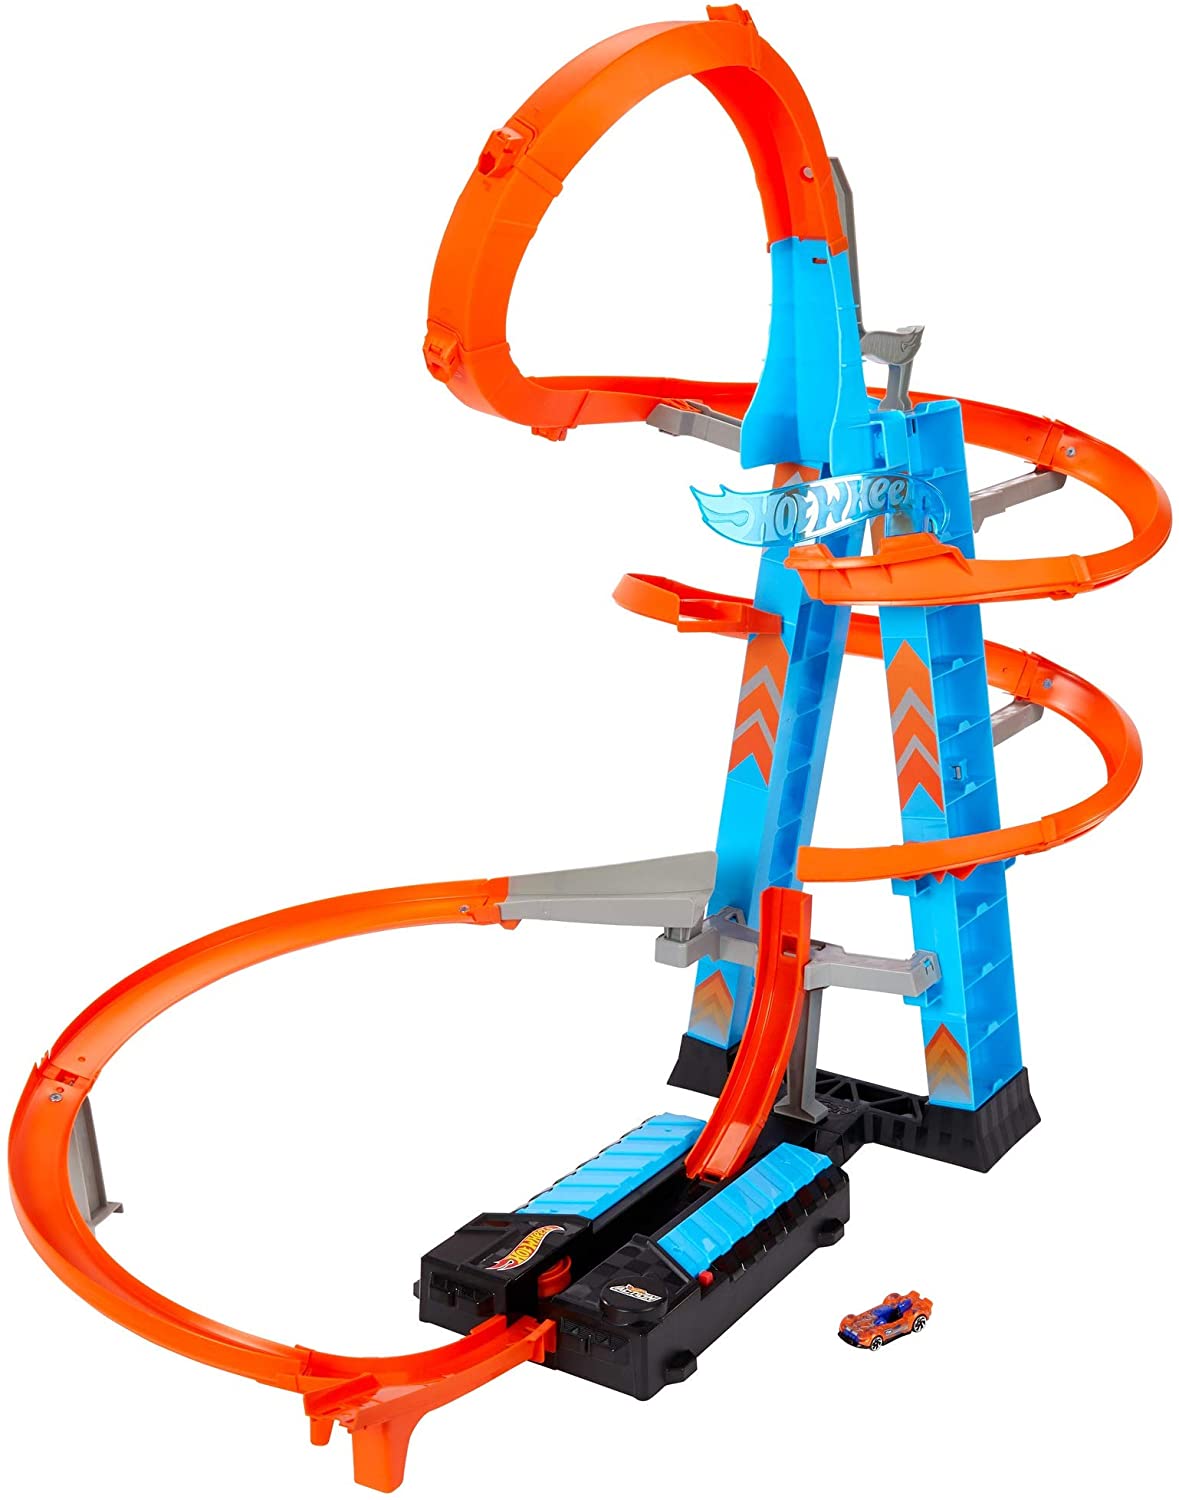 Hot Wheels Sky Crash Tower Track Set, 2.5+ ft / 83 cm High with Motorized Booster